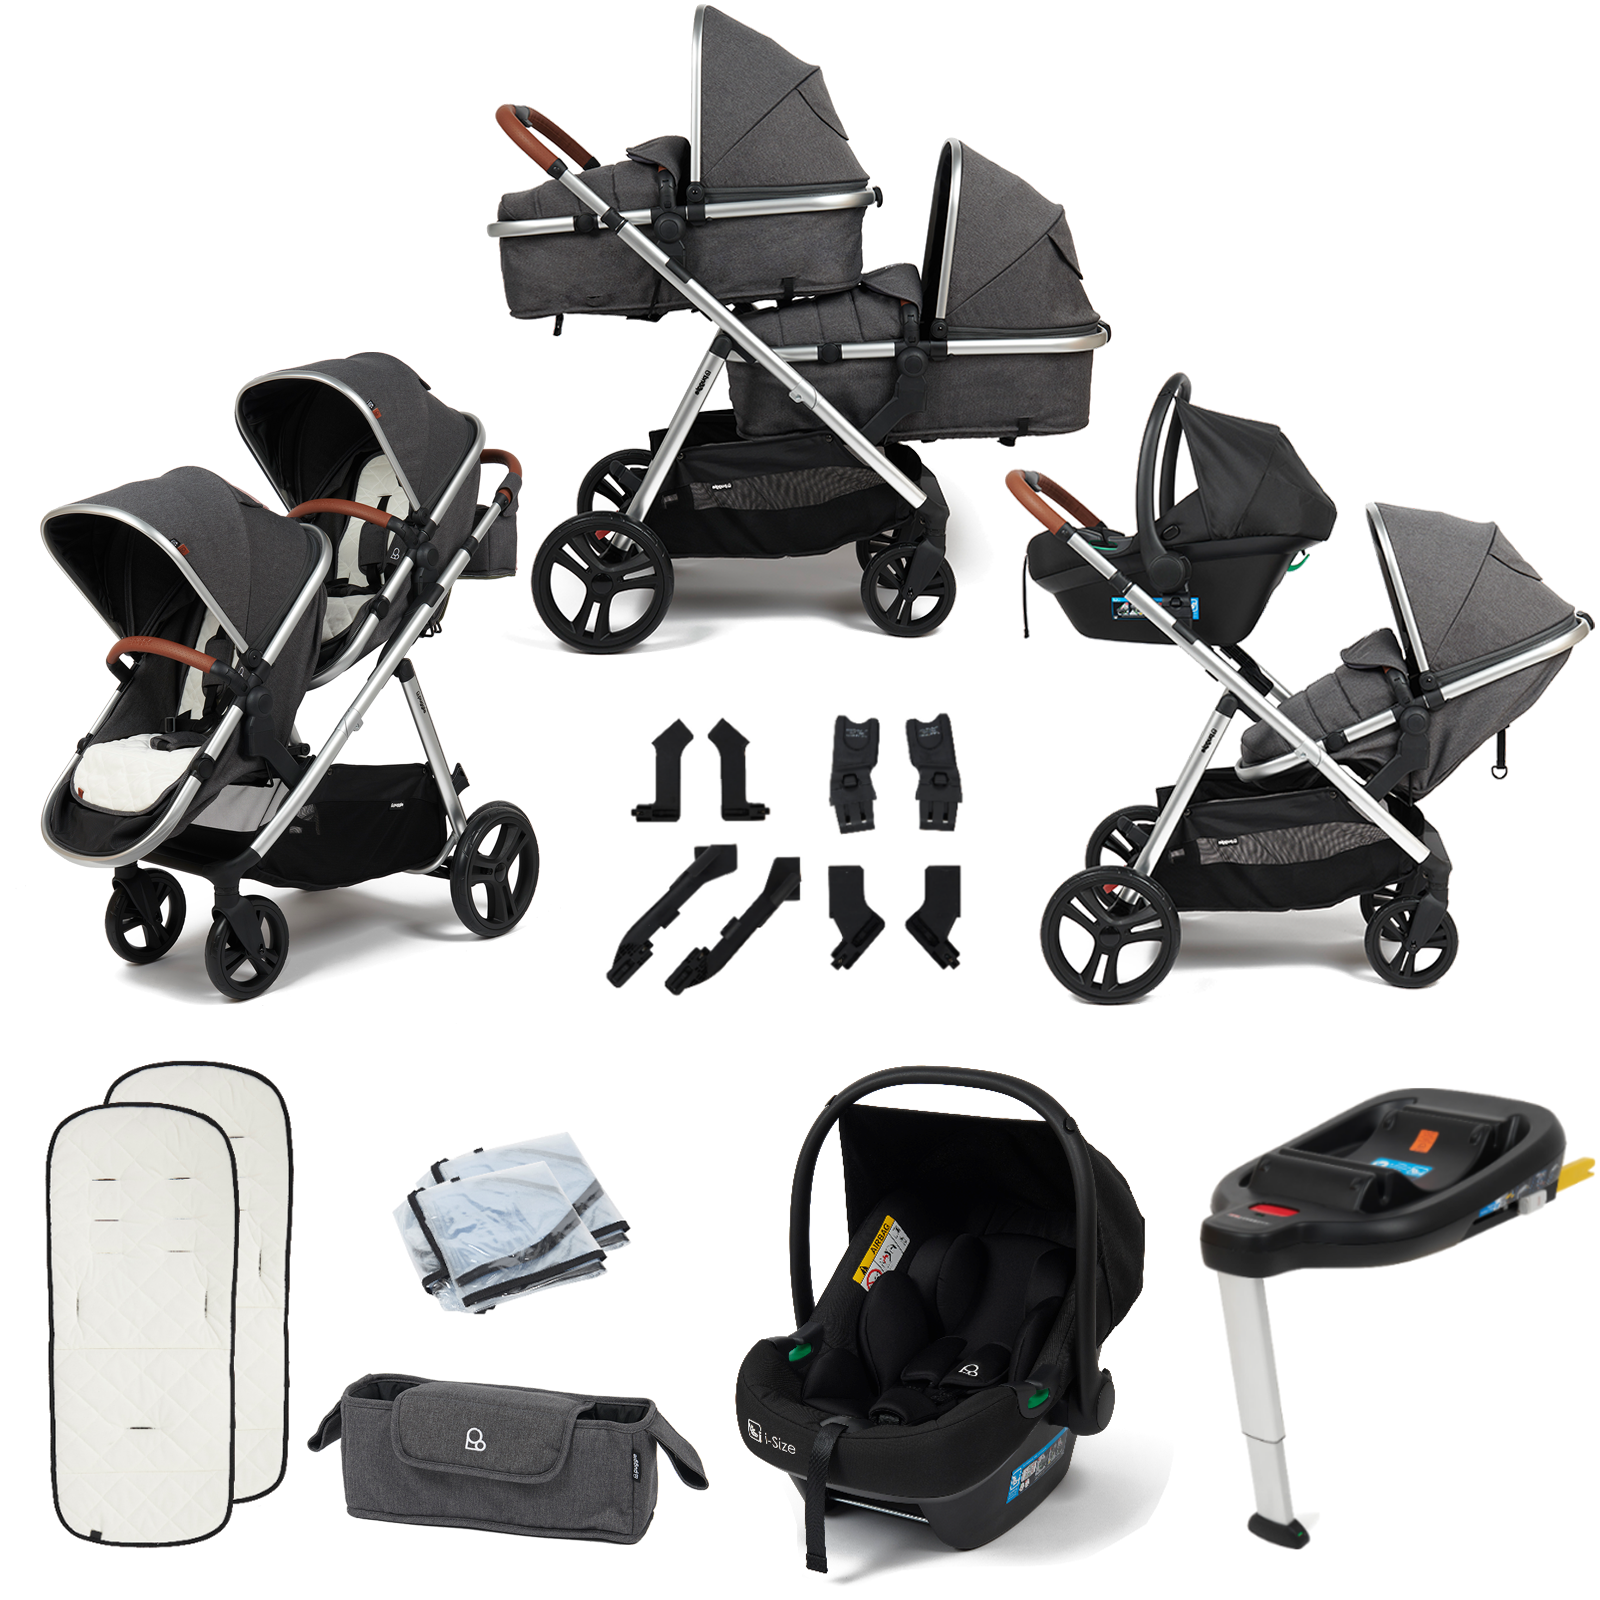 Puggle Memphis 2-in-1 Duo i-Size Double Twin Travel System with ISOFIX Base – Platinum Grey (Chrome Frame)